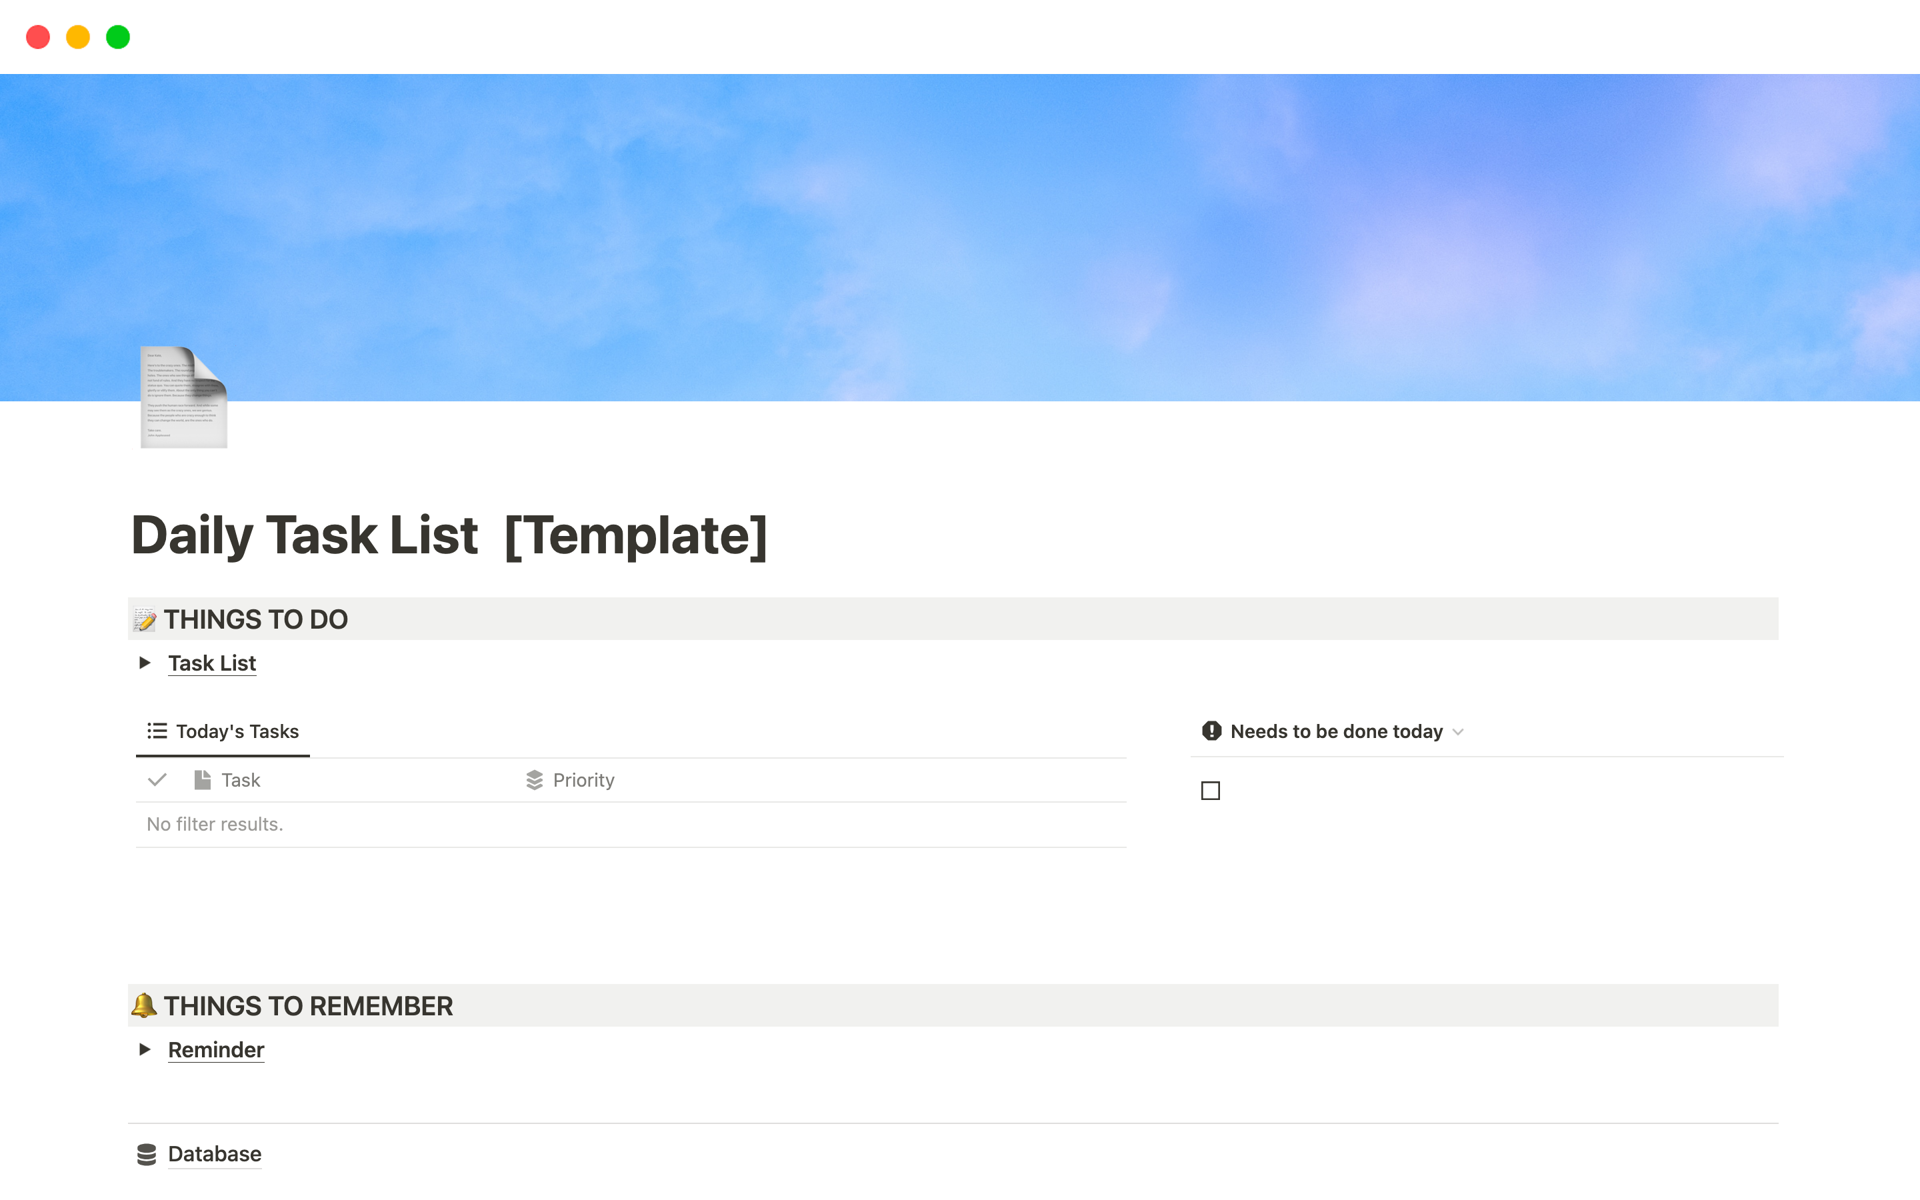 This template helps you manage your daily tasks efficiently by providing a task list feature and a reminder feature.